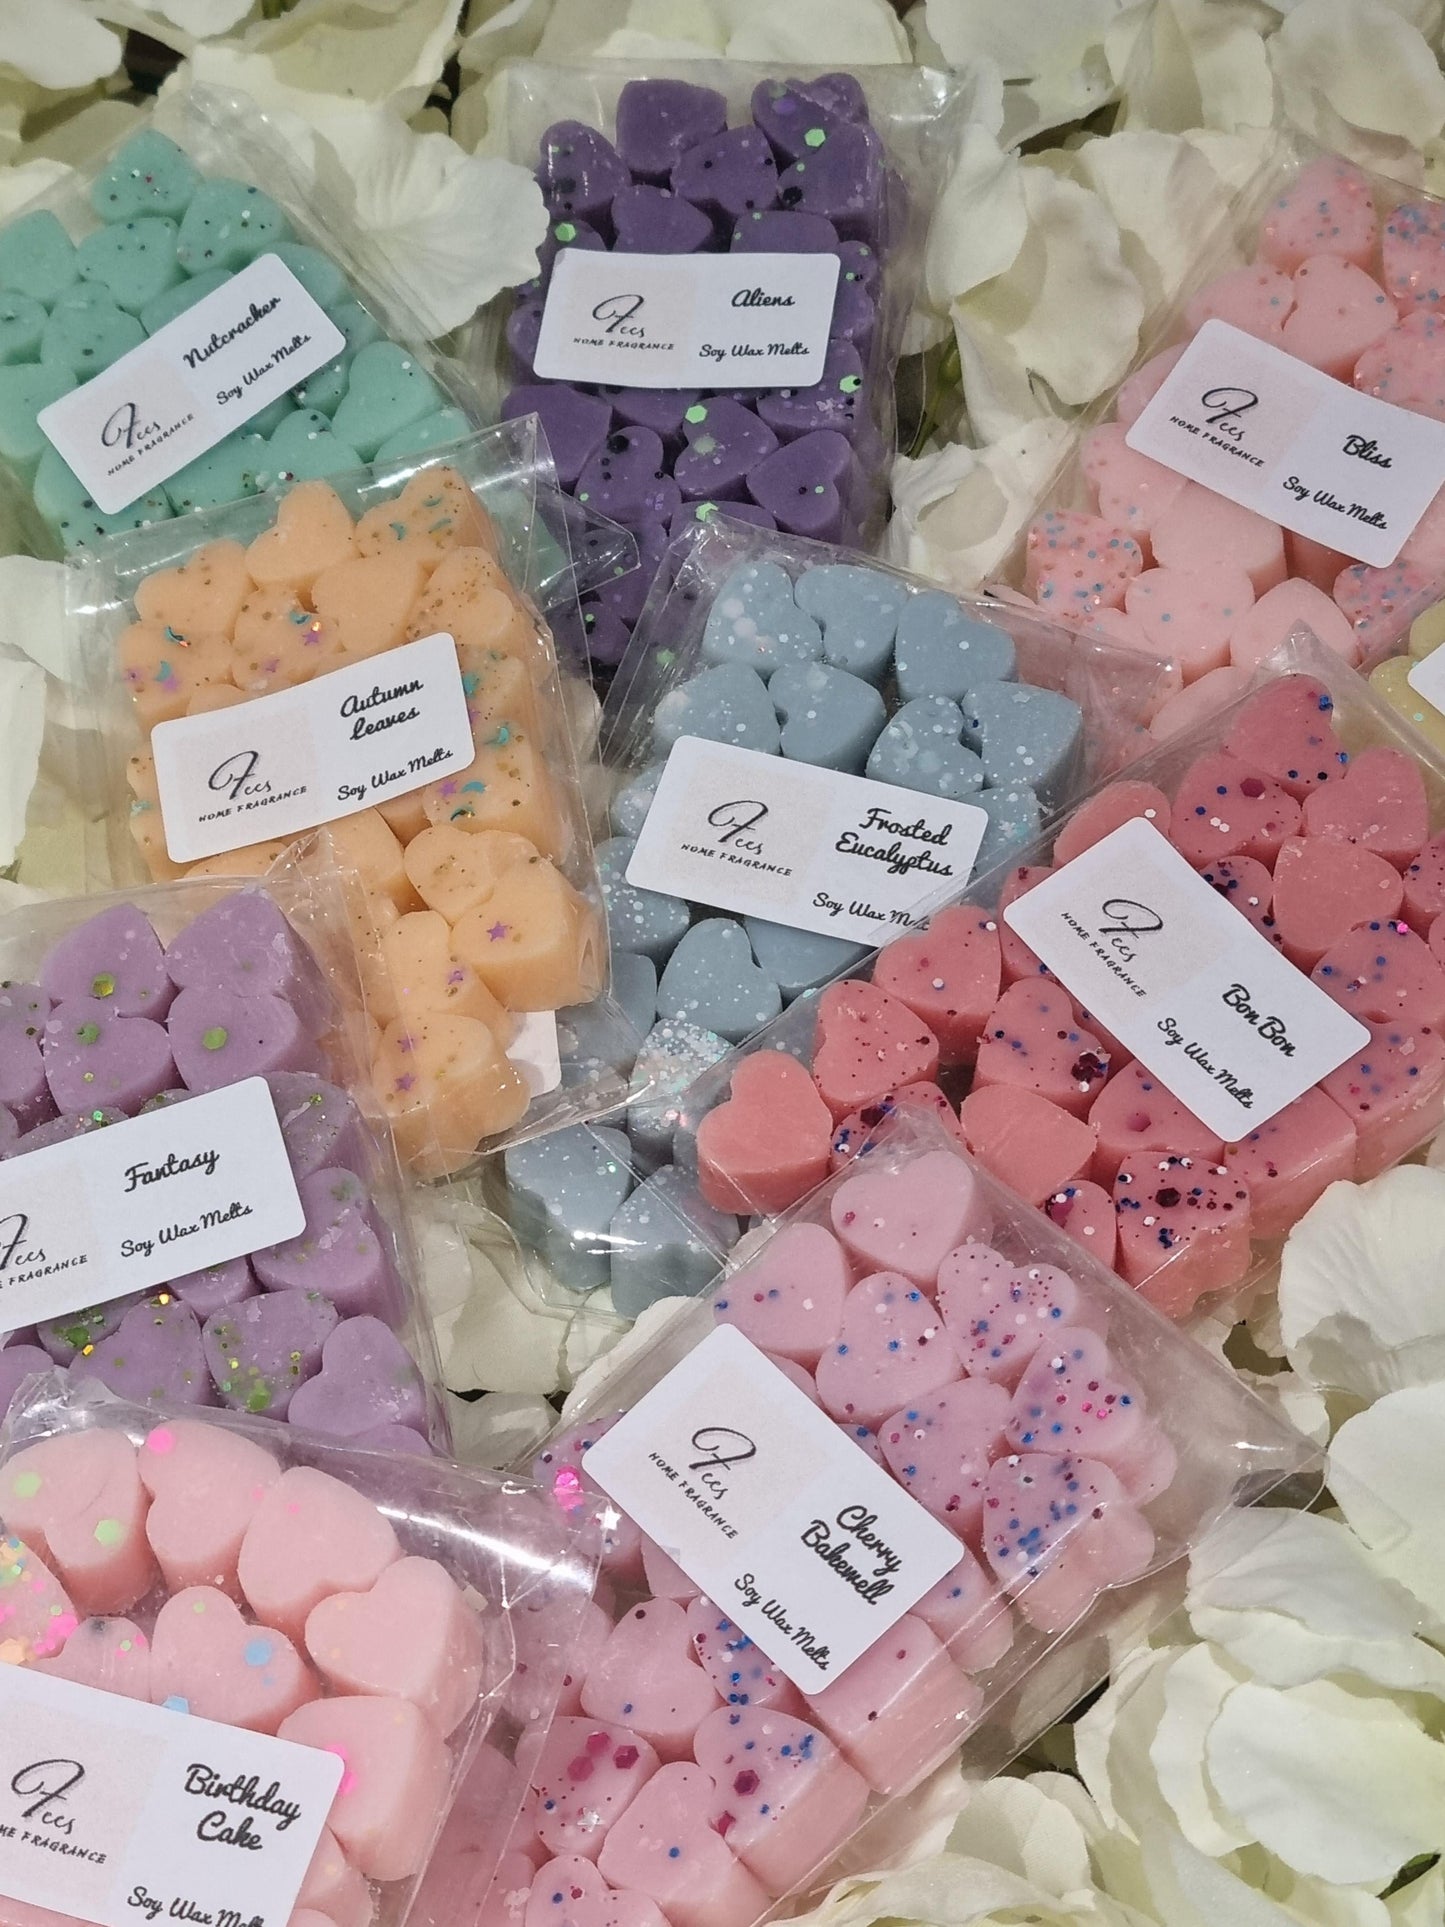 25 mini heart melts - Perfume & Aftershave Inspired Scents